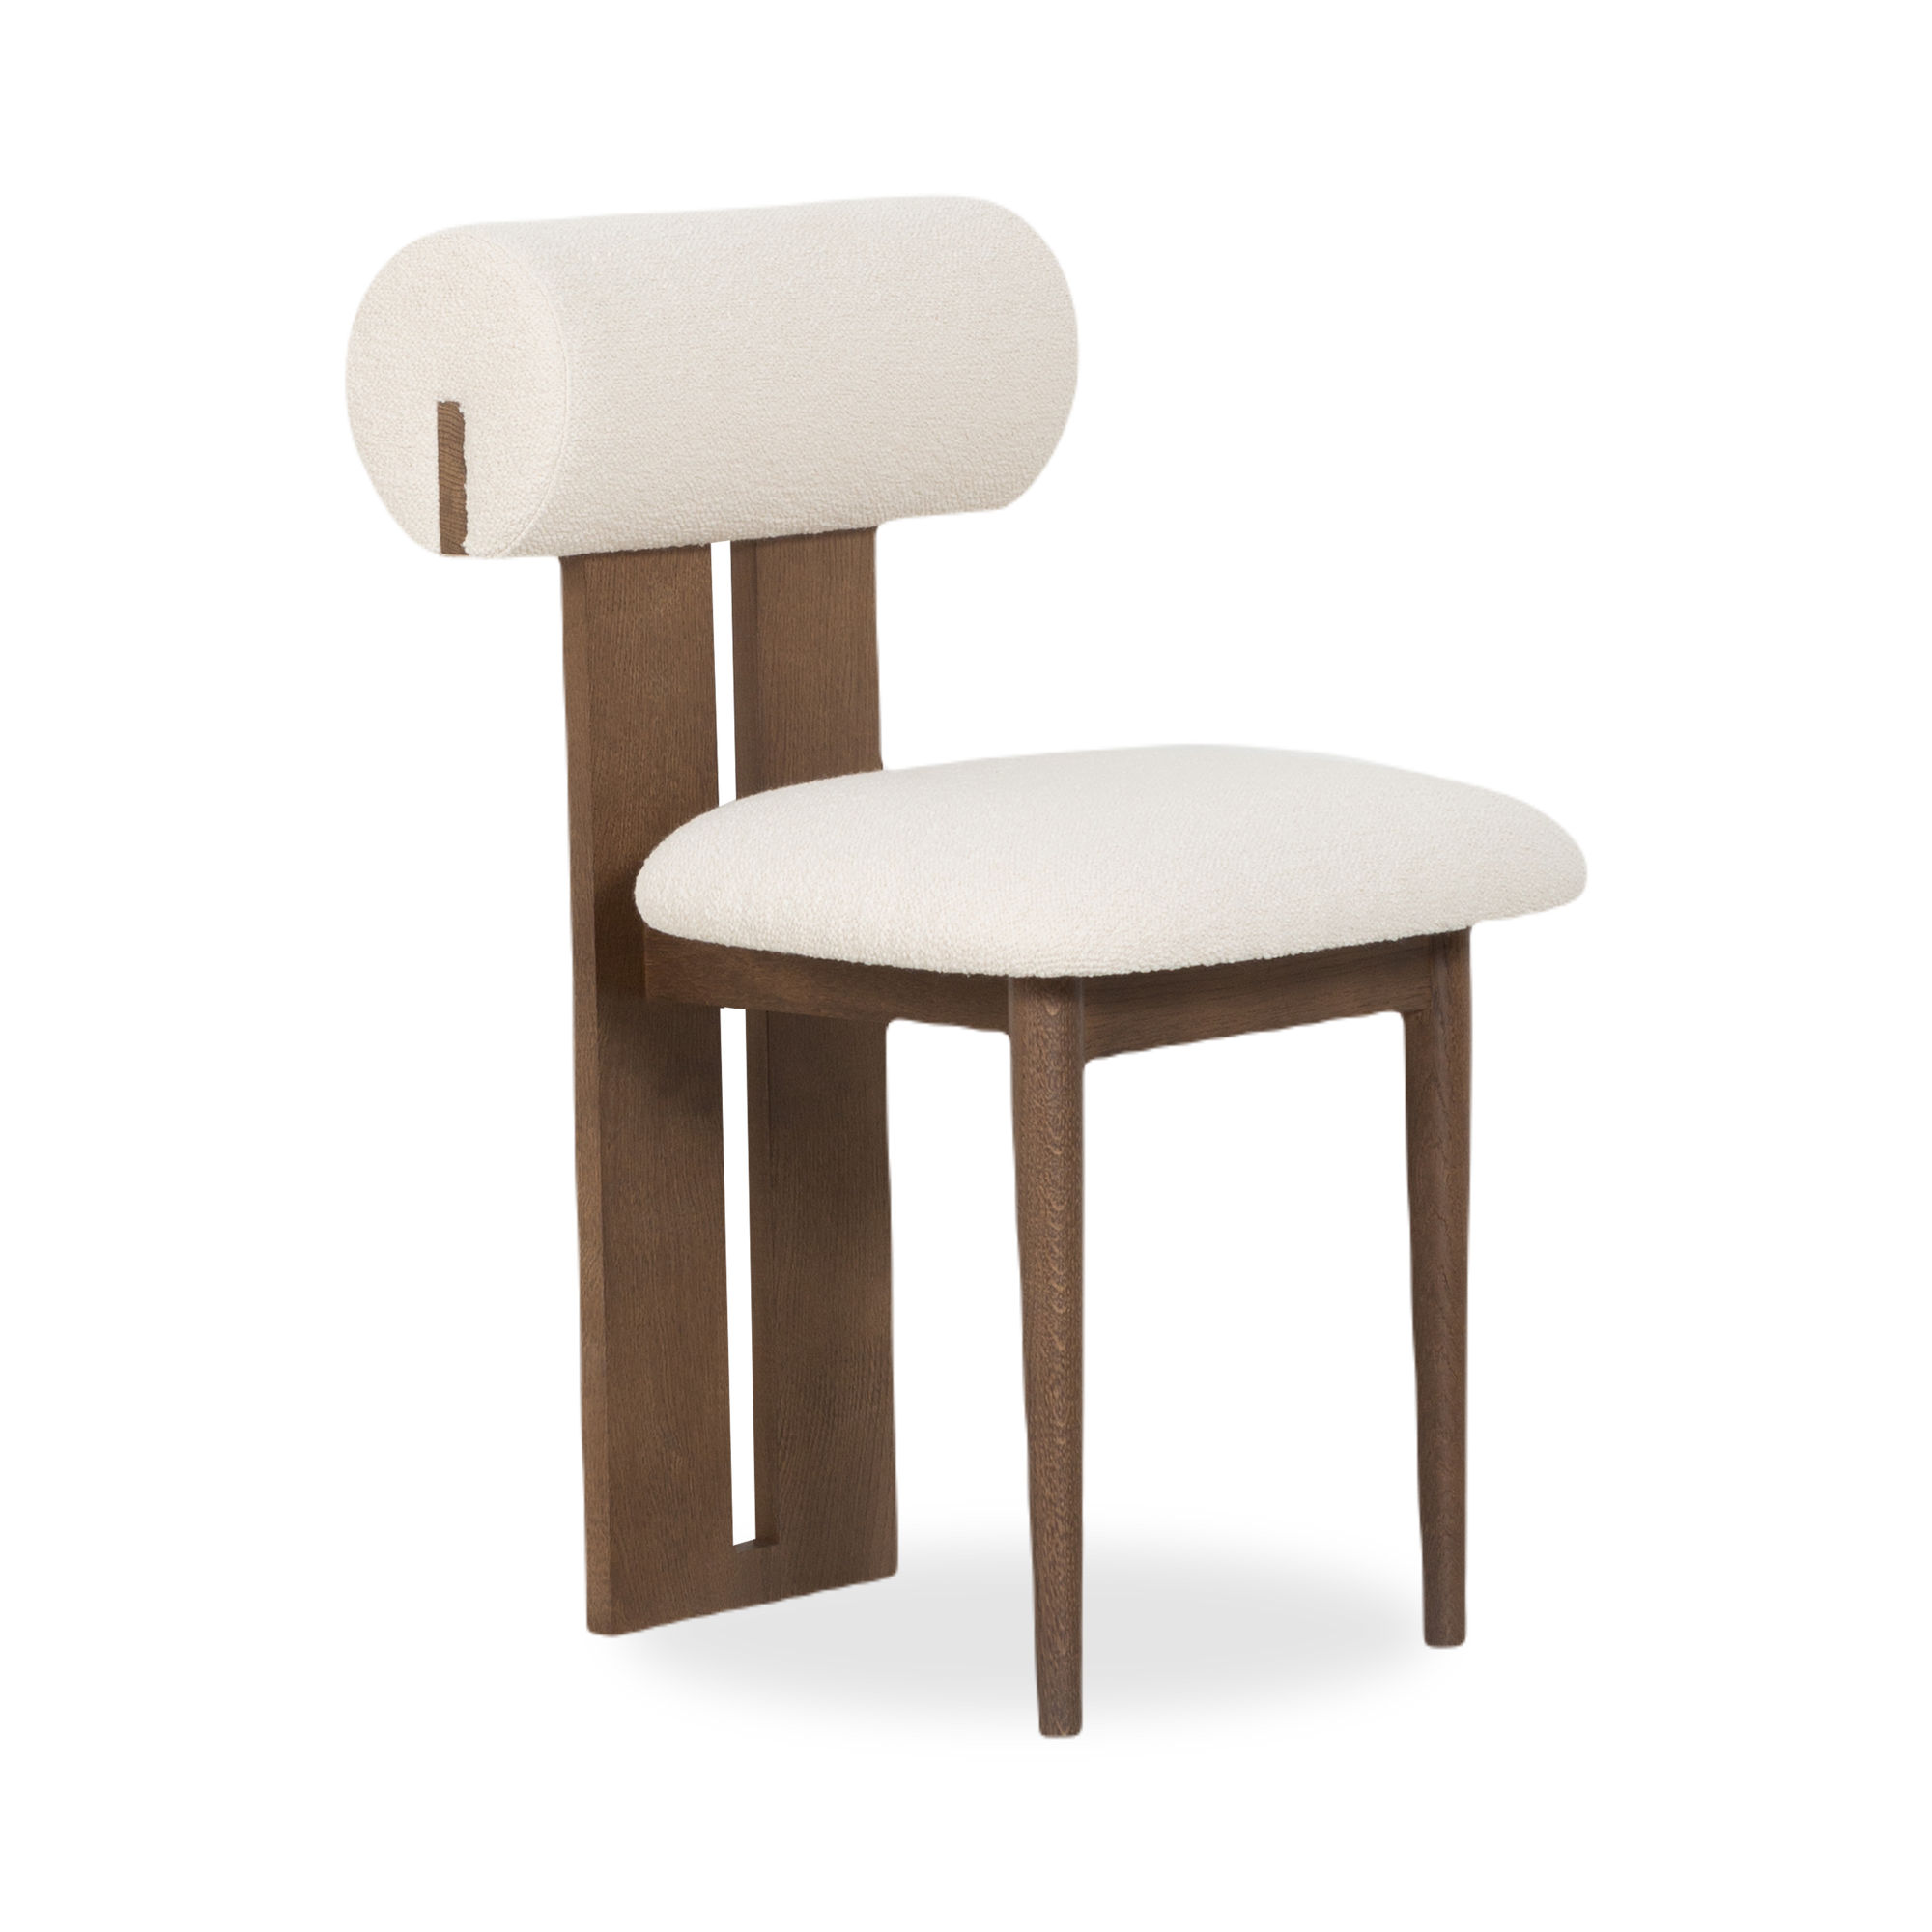 Characterized by its soft and playful shapes, the Hippo Dining Chair makes a stylish statement in any space.